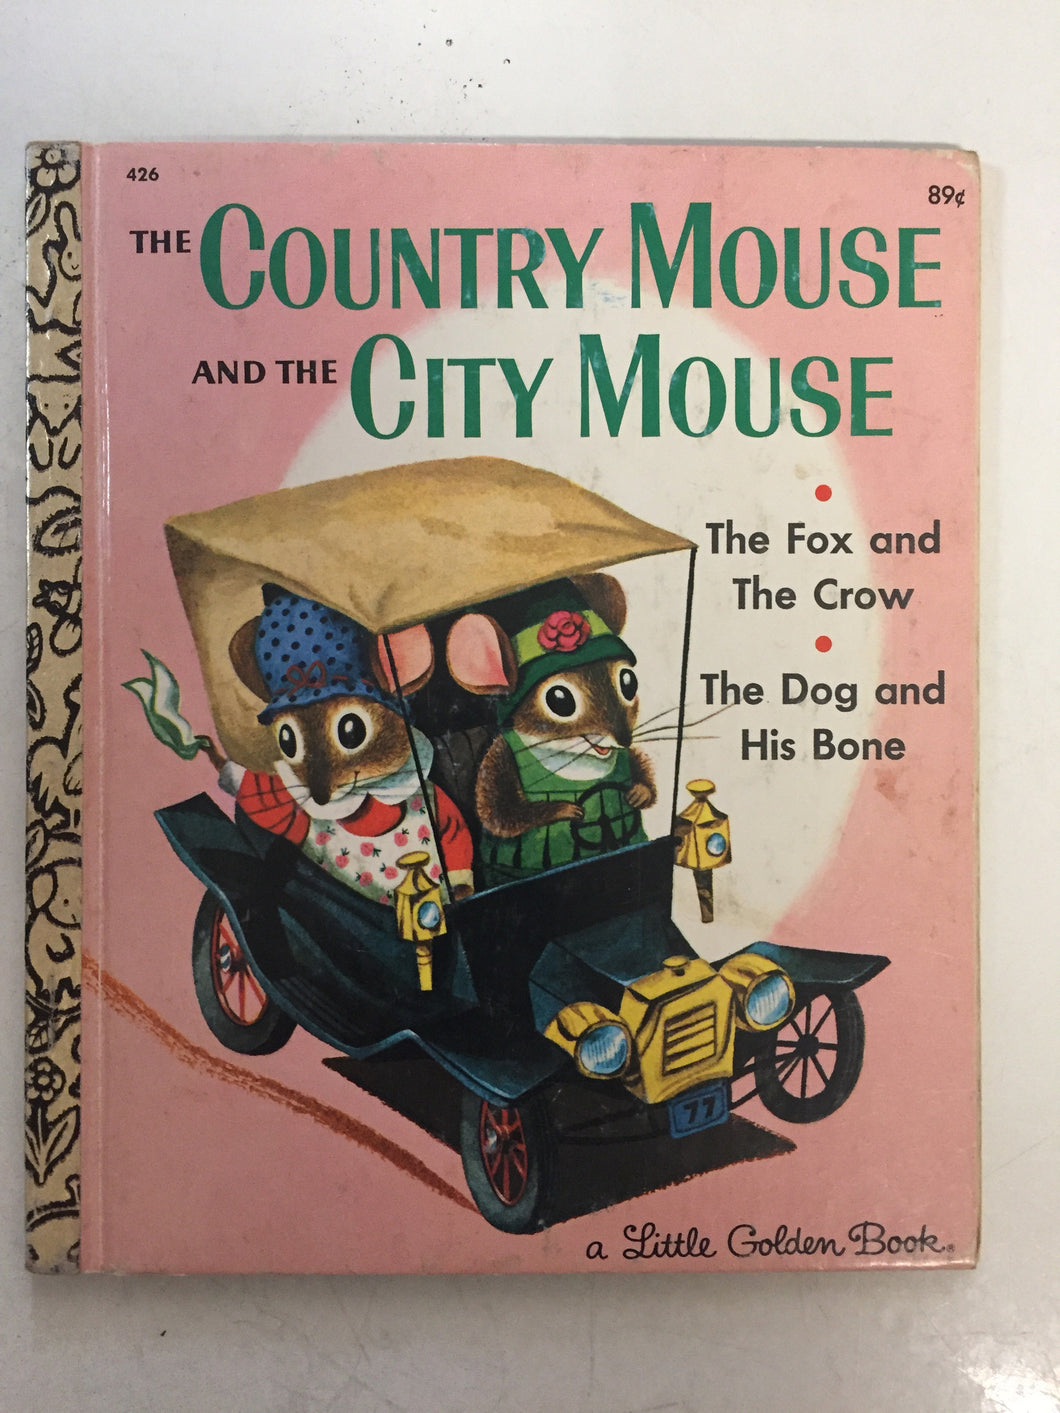 The Country Mouse and the City Mouse The Fox and The Crow The Dog and His Bone - Slickcatbooks